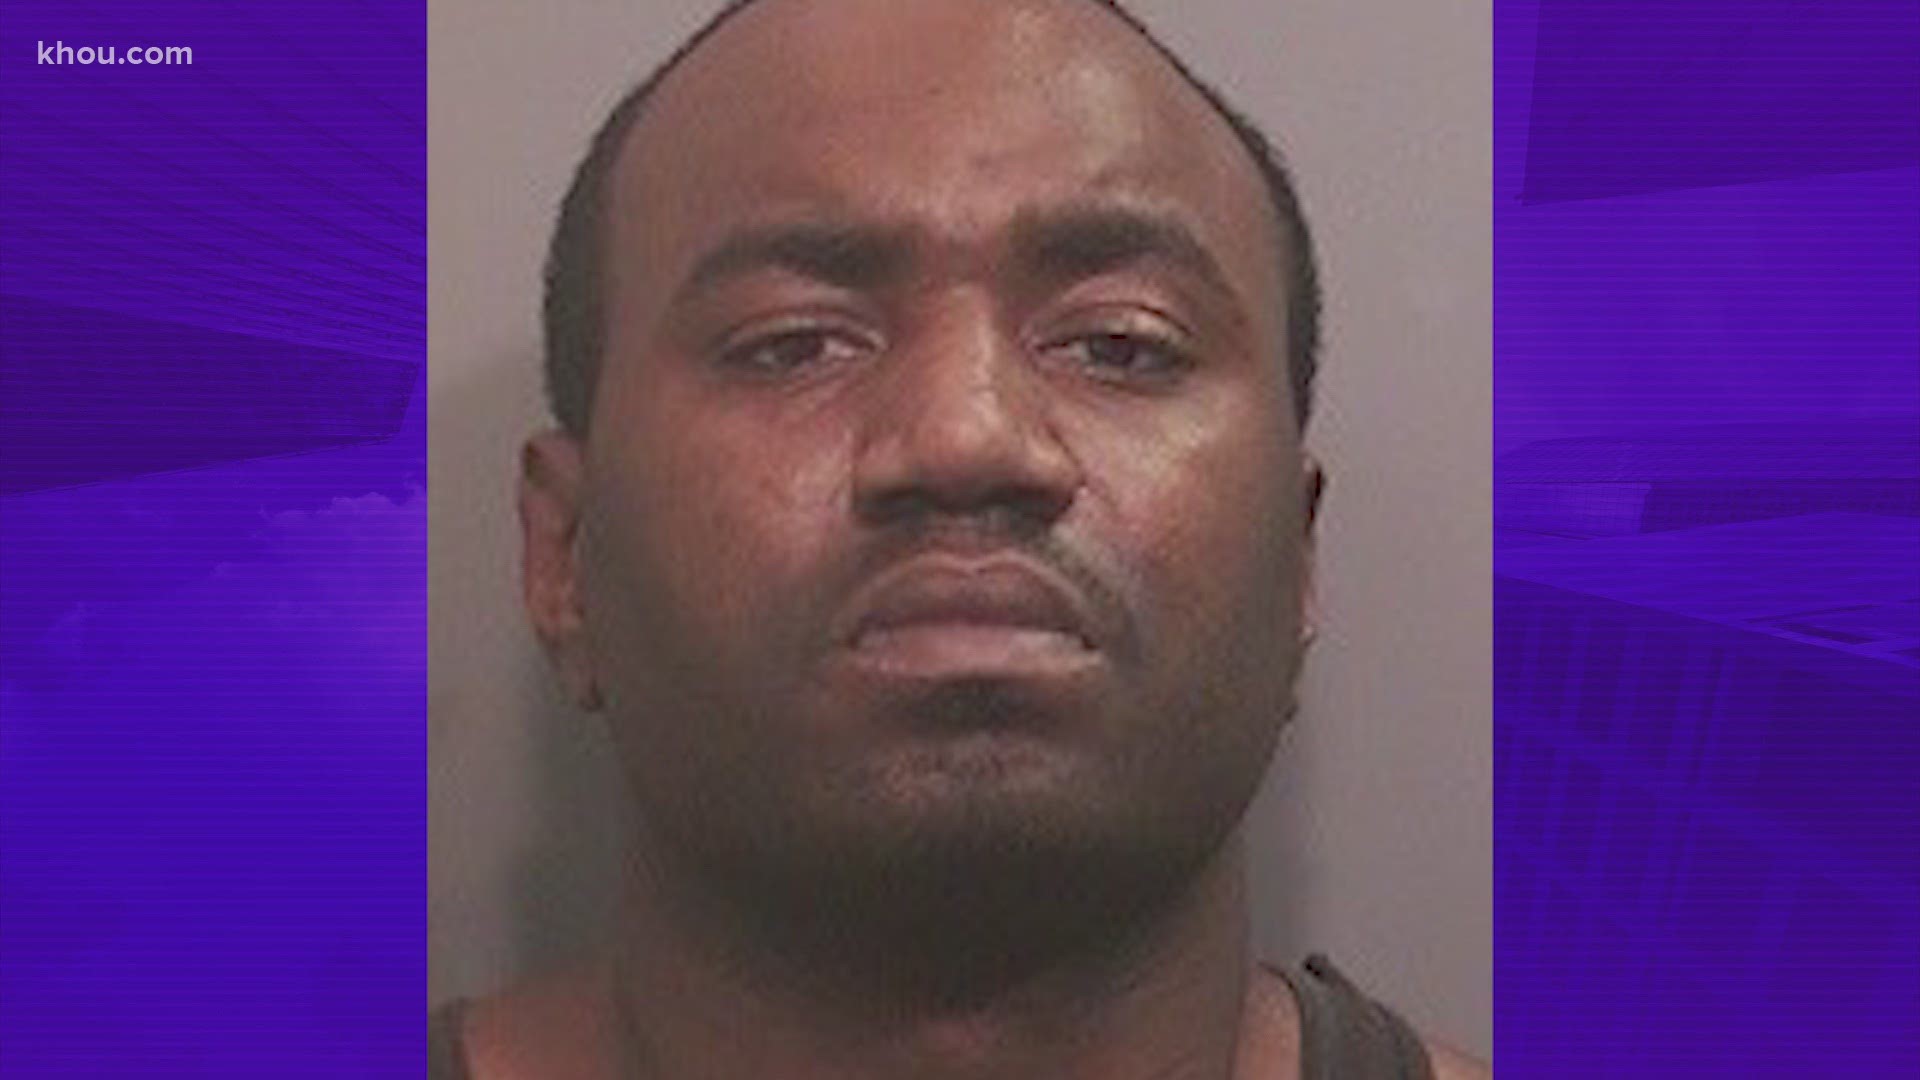 Police are searching for Decedric McLemore who's accused of sexually assaulting a child in December 2017. He may be in southeast Houston.